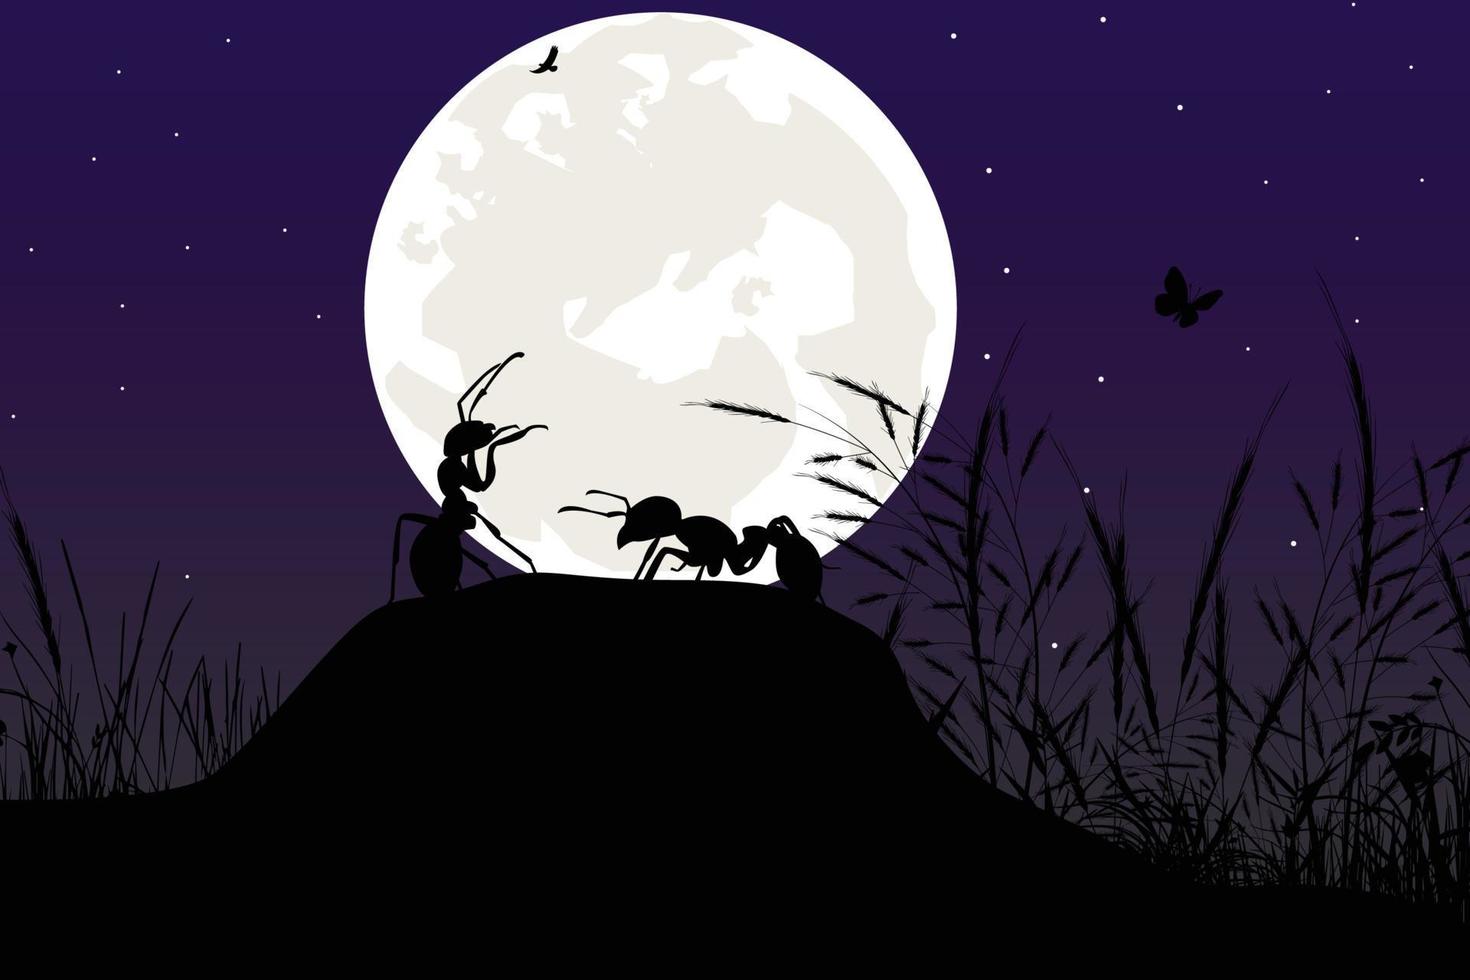 cute ant and moon silhouette vector